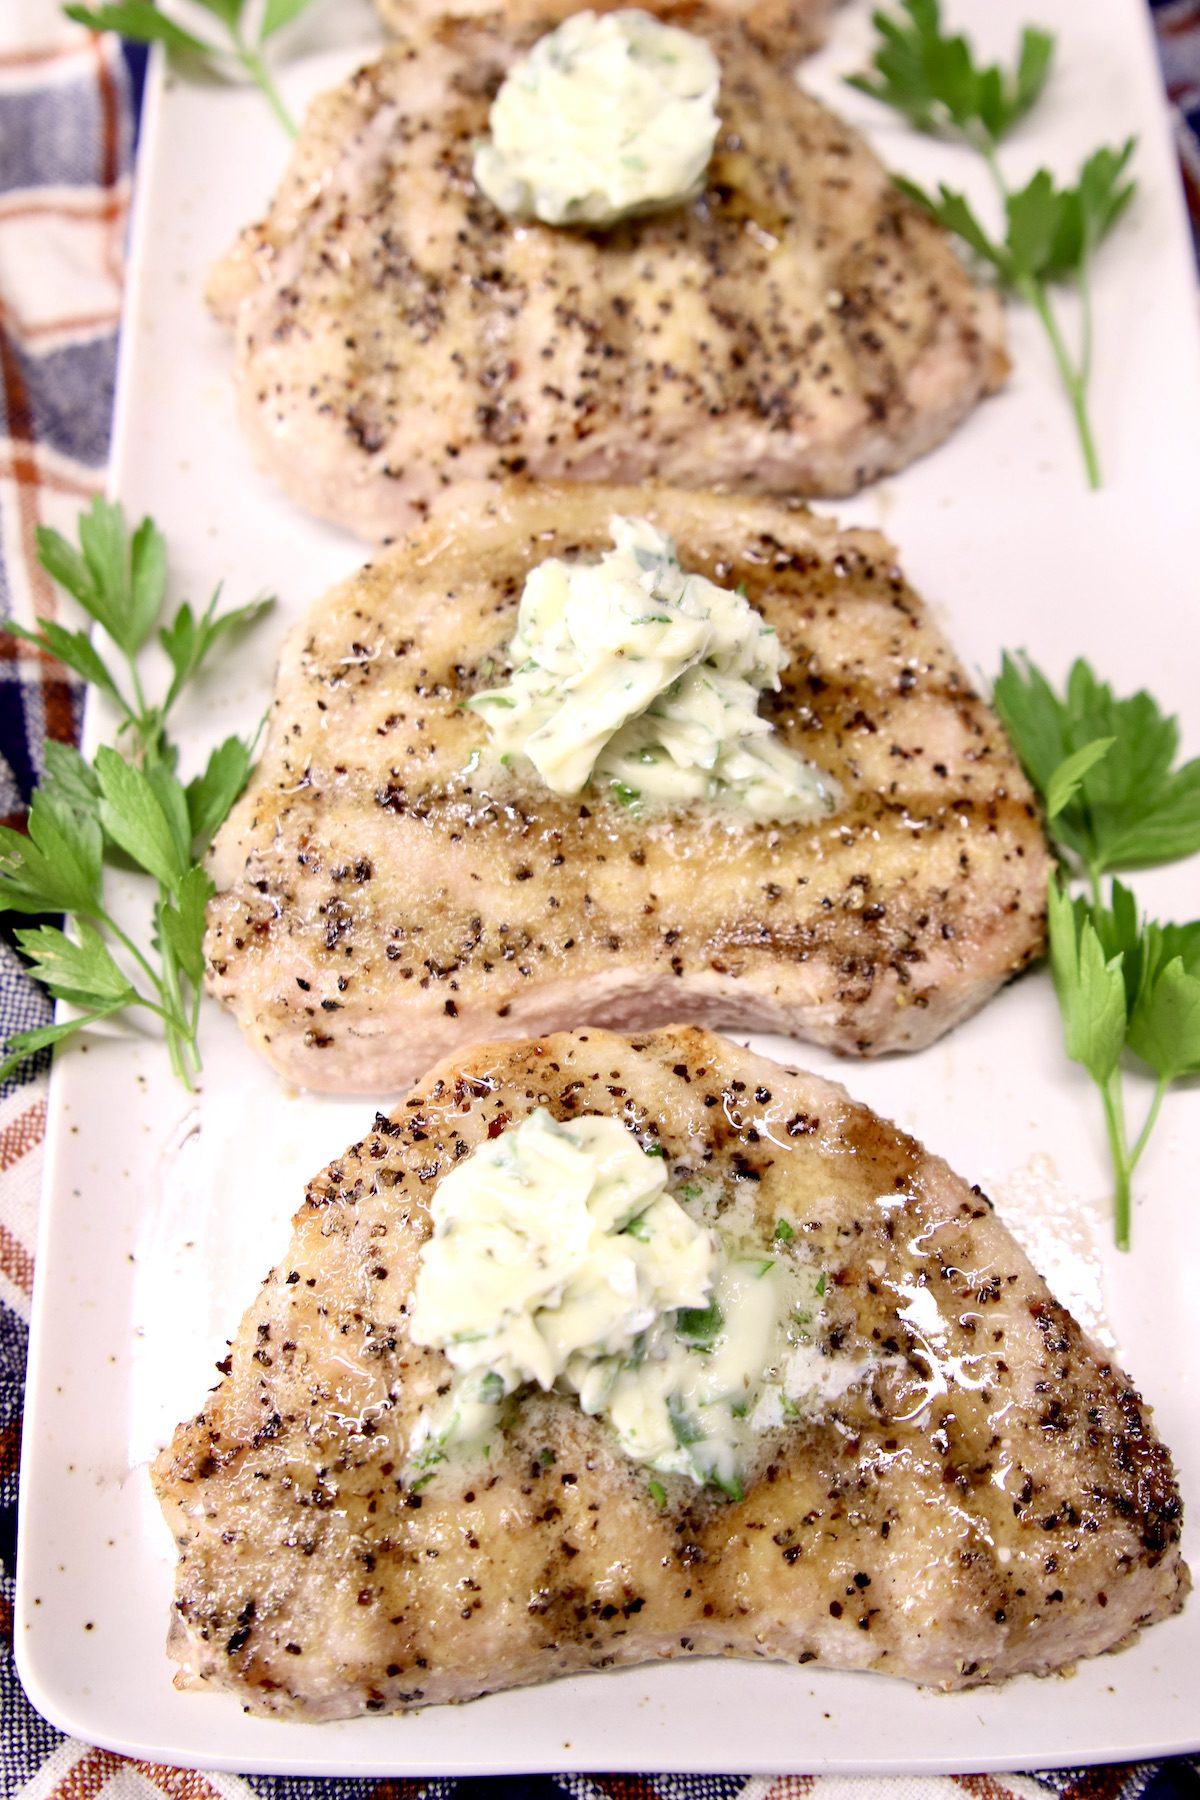 3 Grilled pork chops topped with garlic butter